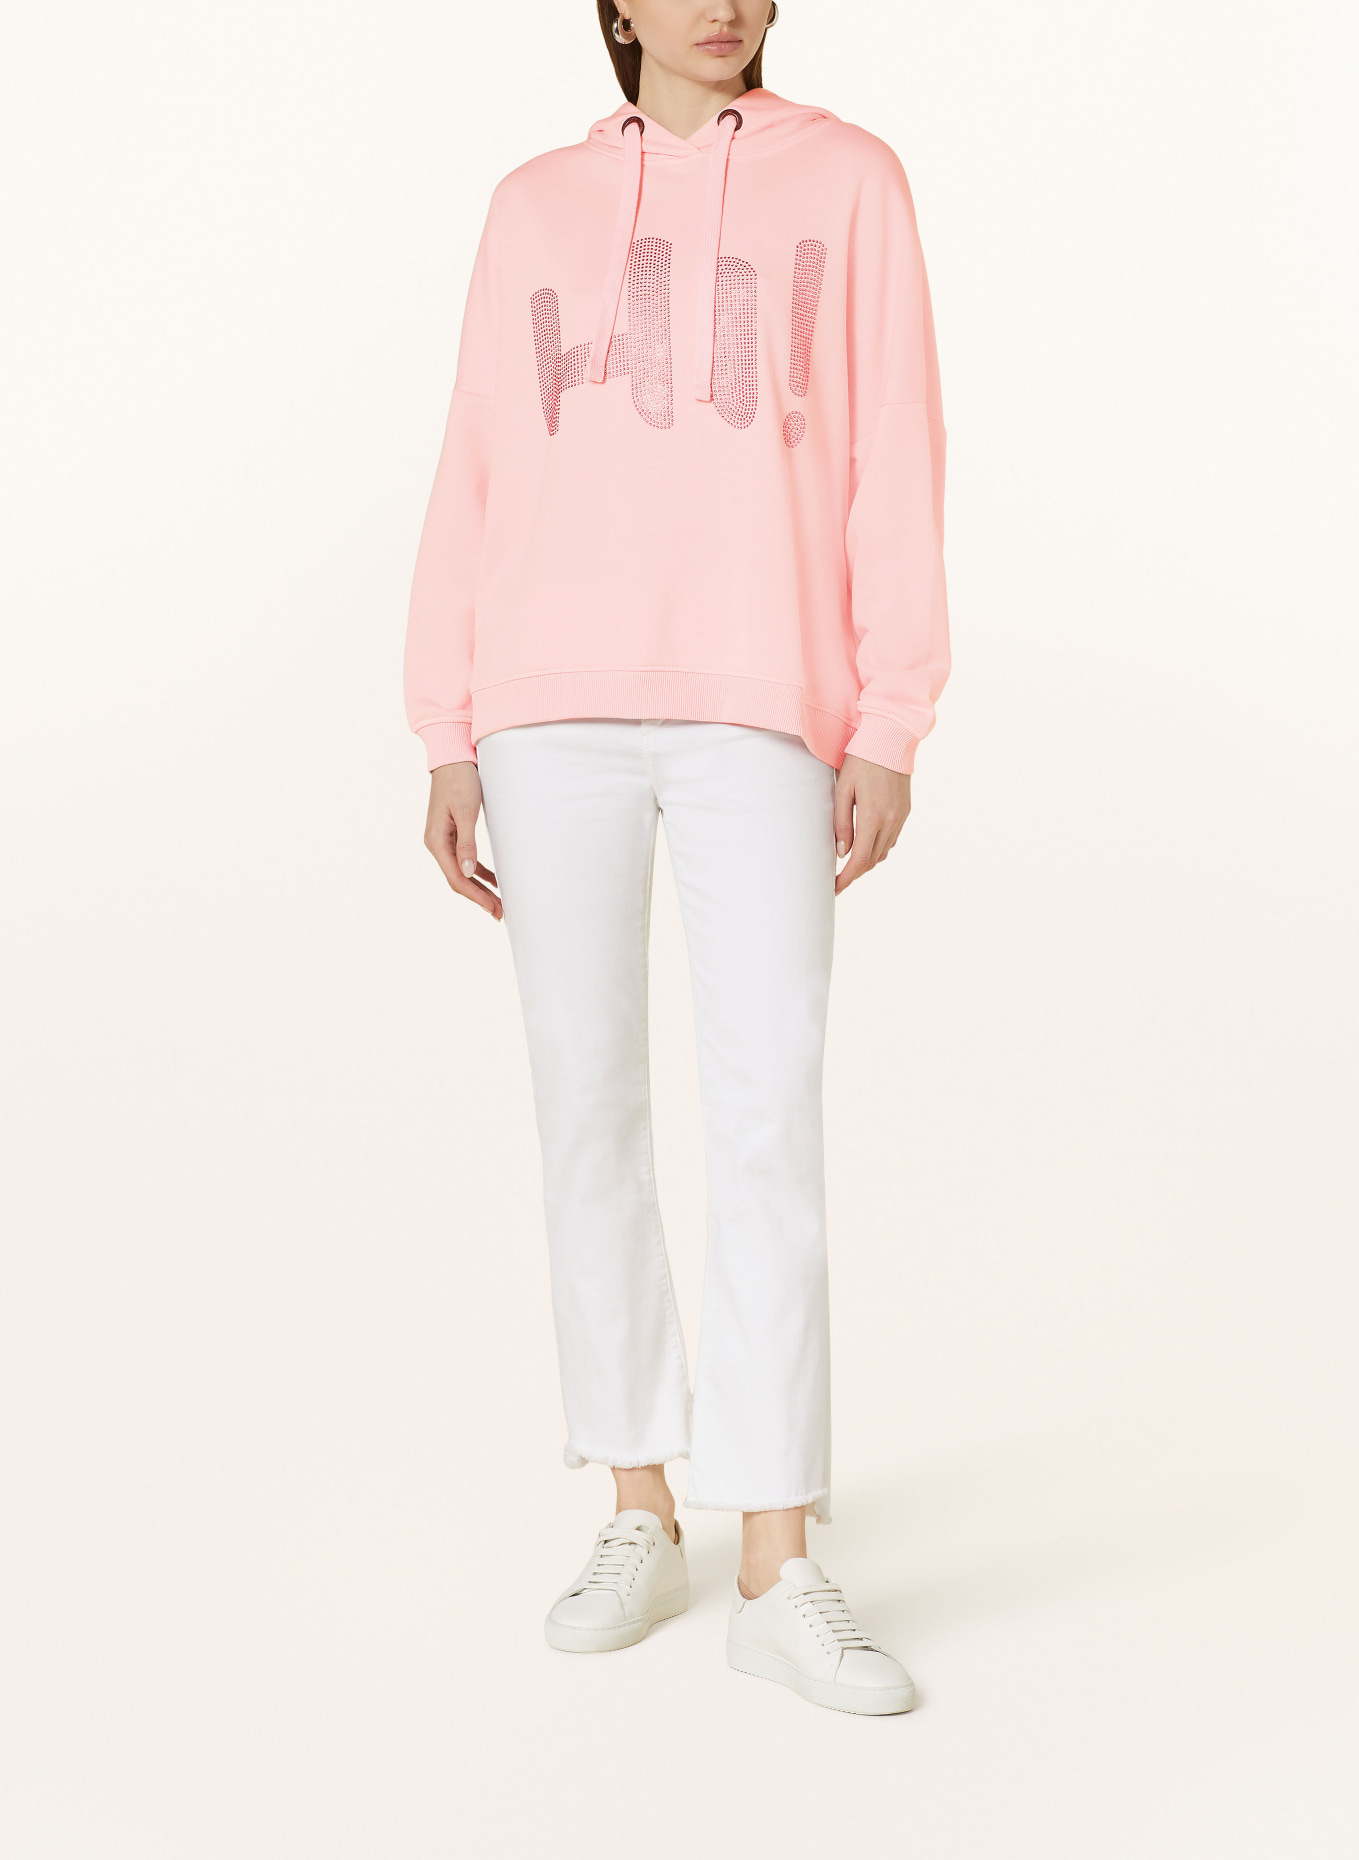 miss goodlife Hoodie with decorative gems, Color: LIGHT PINK (Image 2)